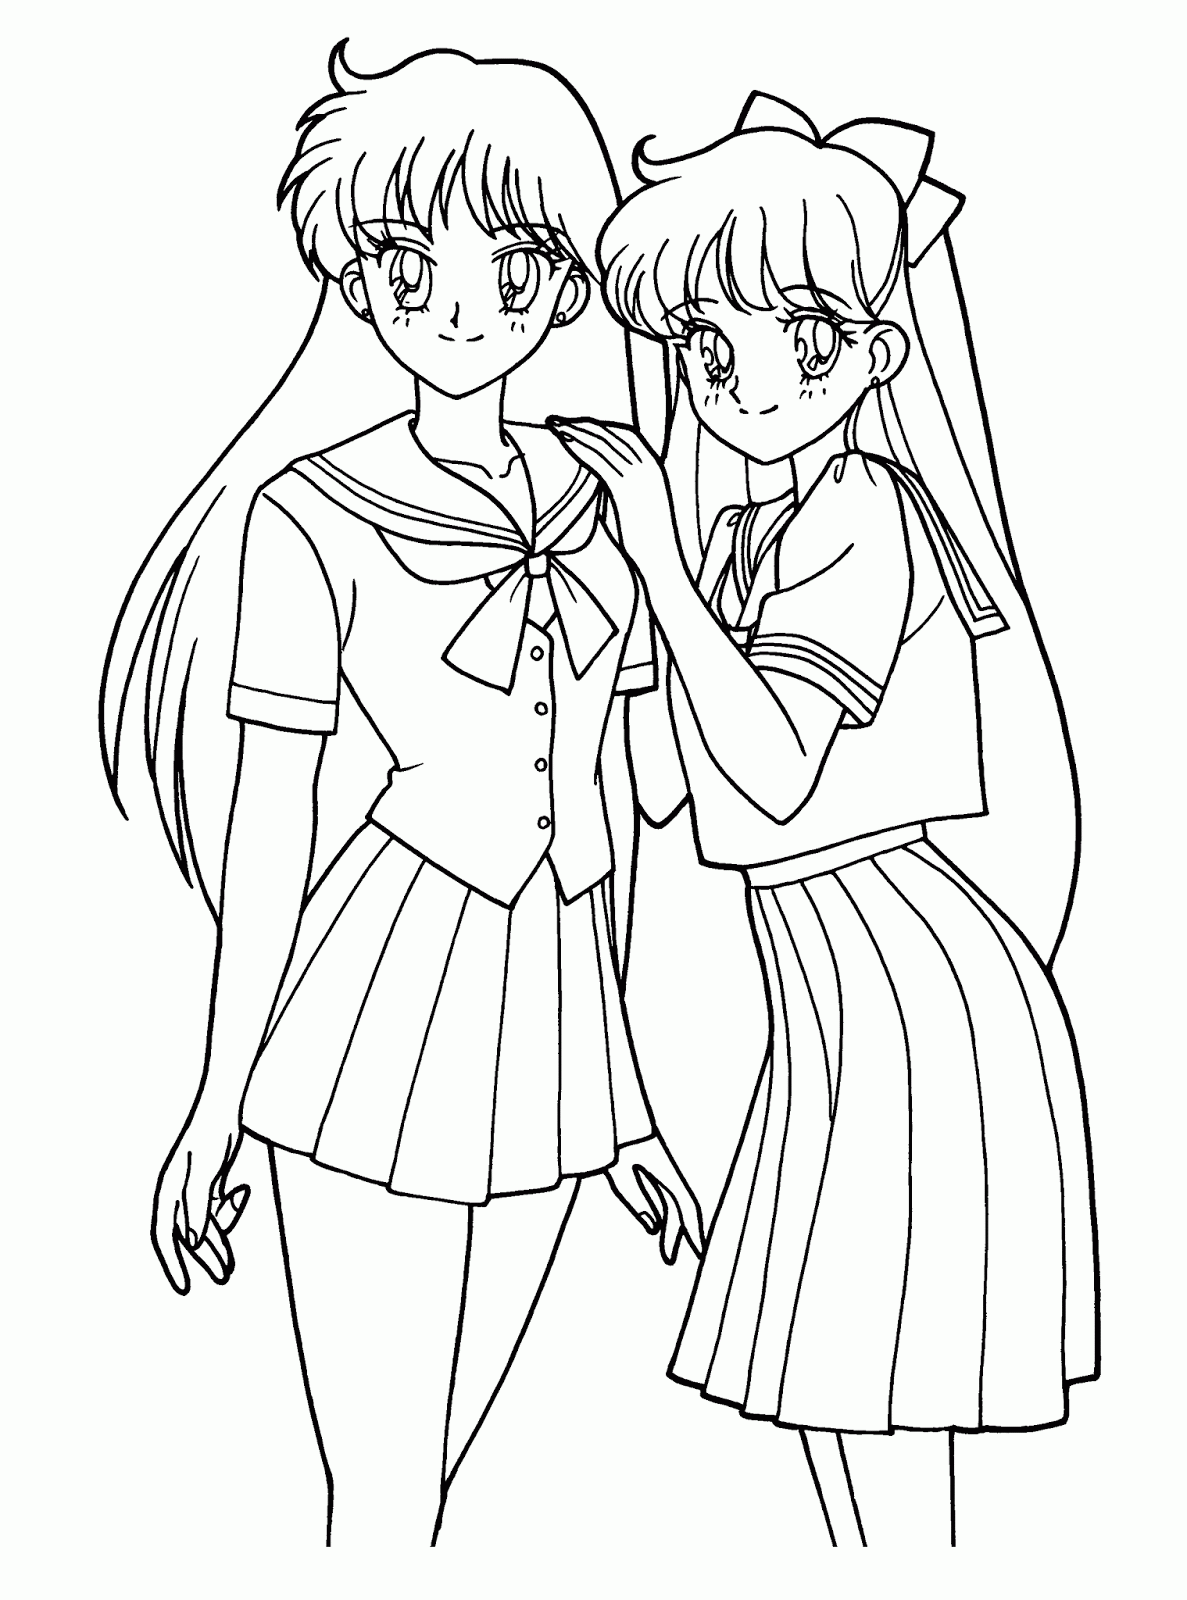 manga girl coloring pages anime coloring pages best coloring pages for kids pages coloring girl manga 